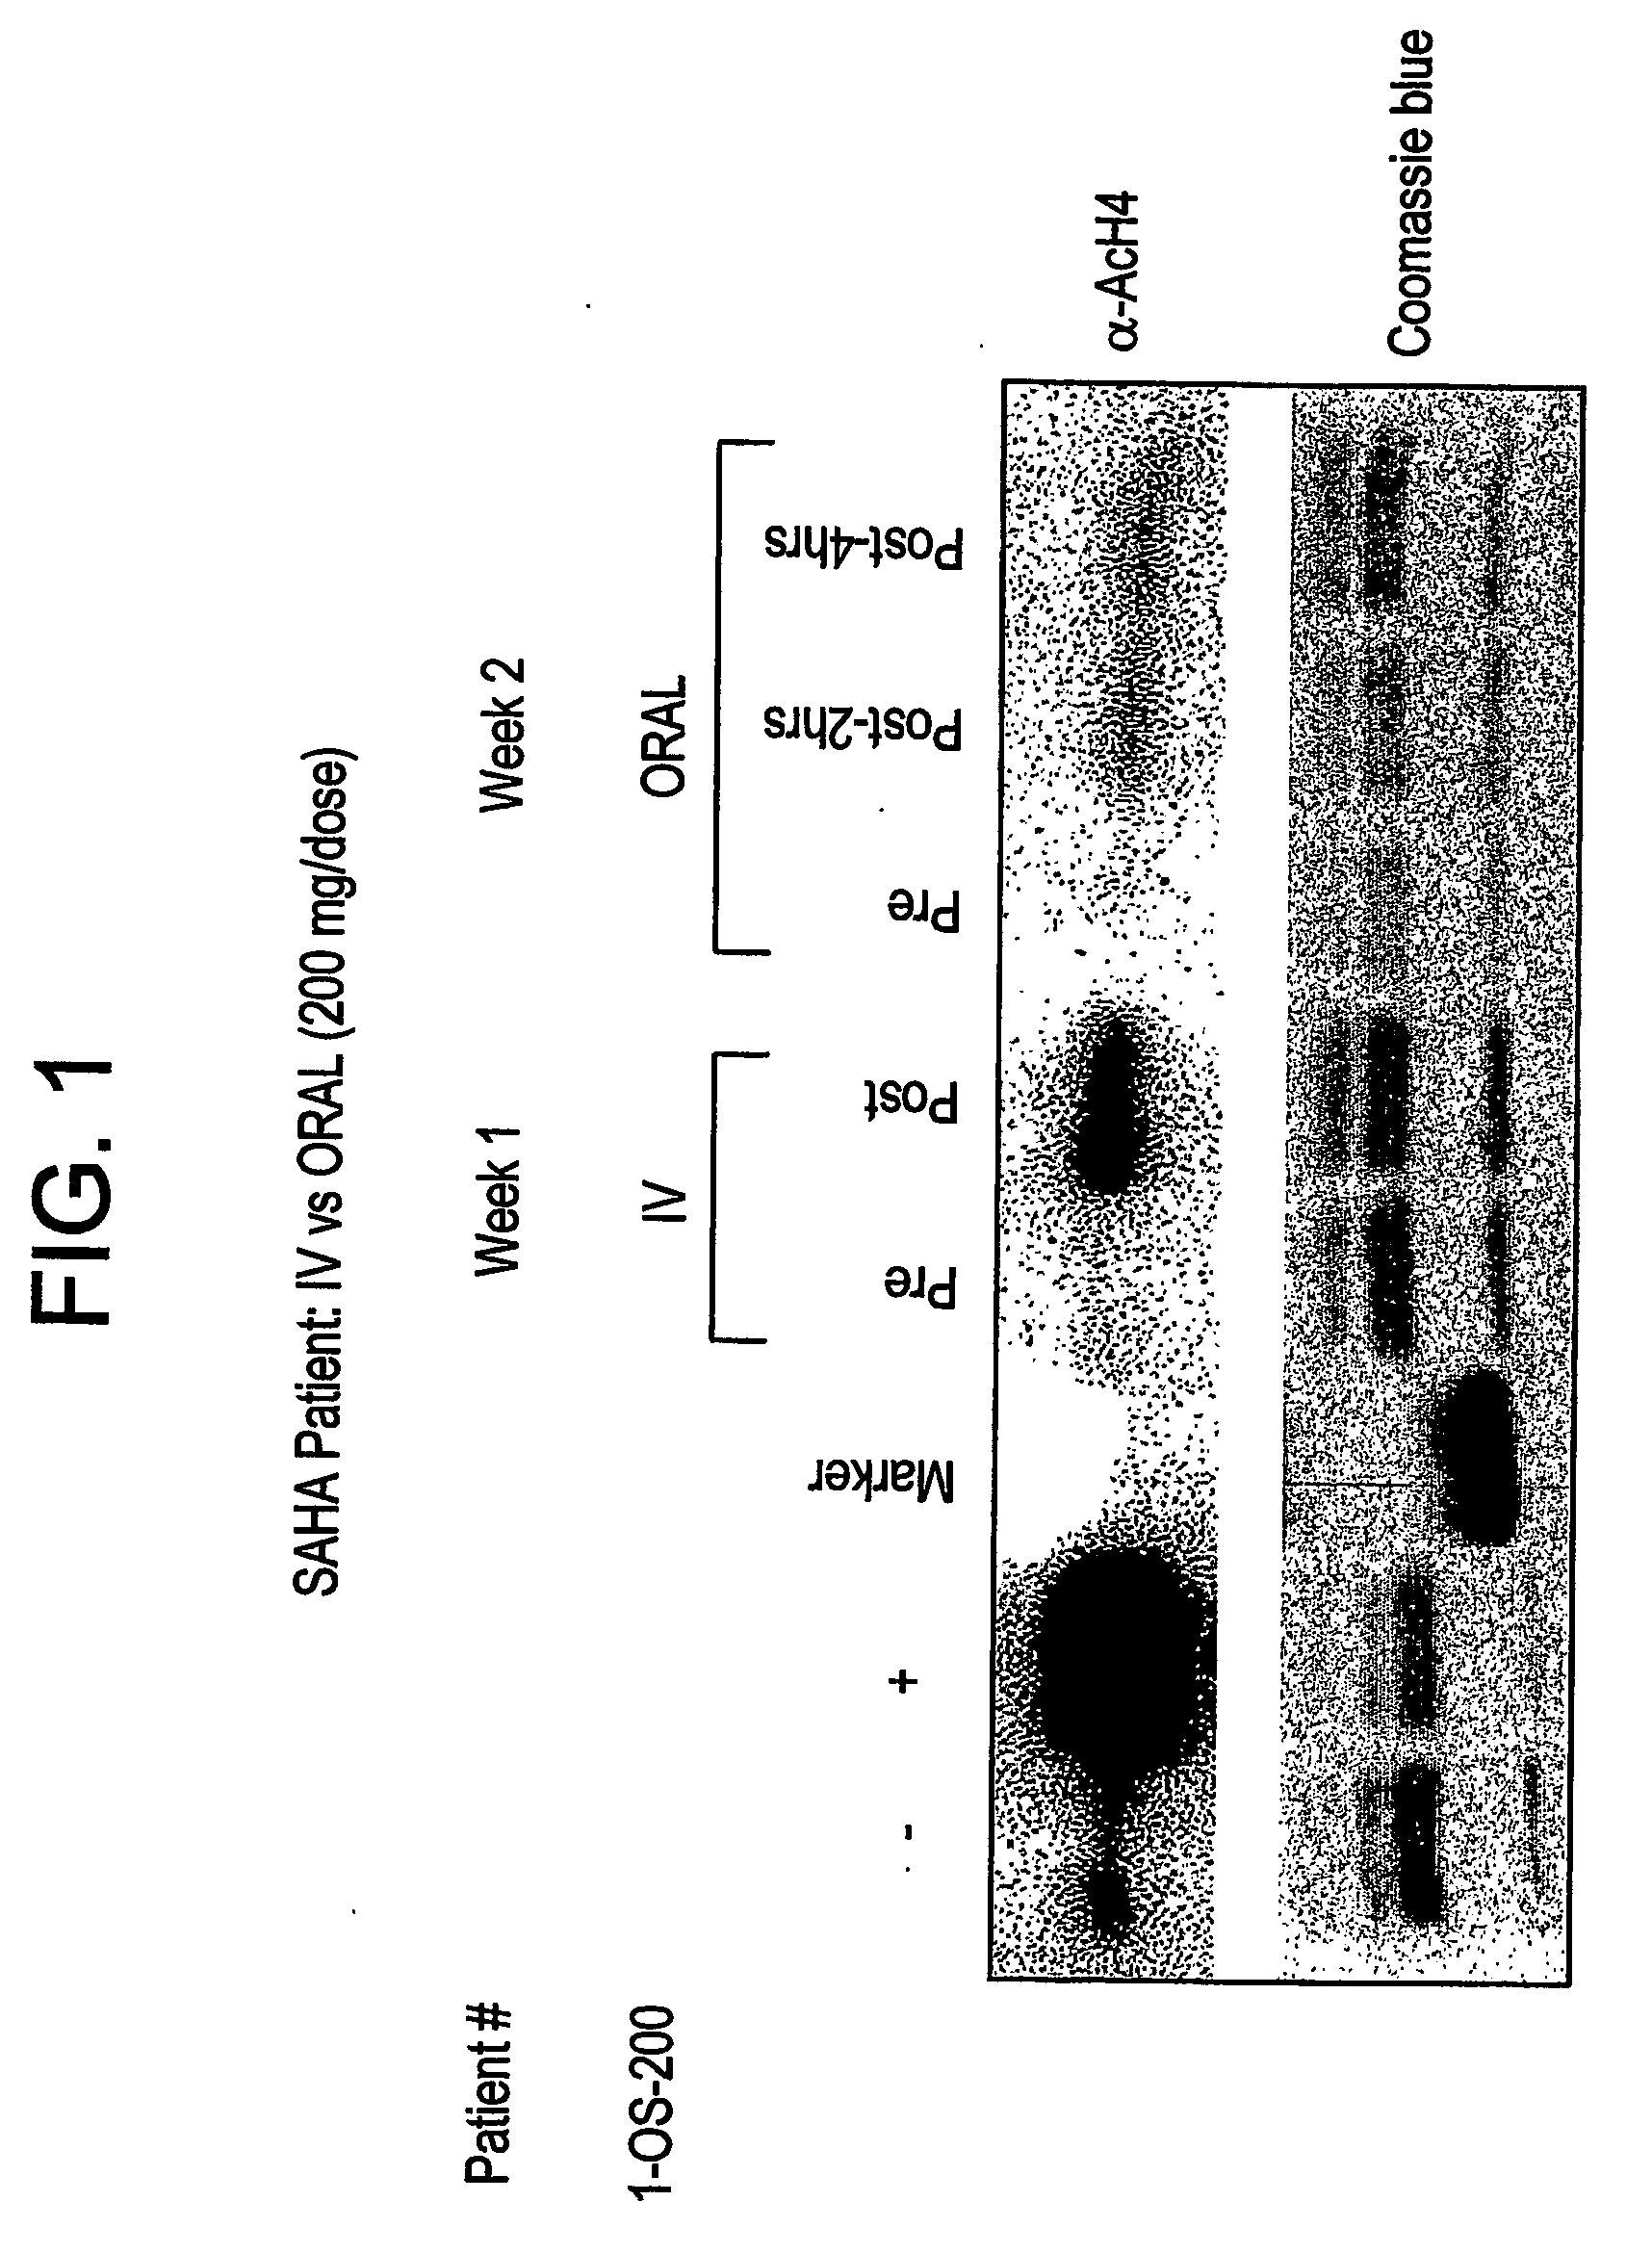 Methods of treating cancer with hdac inhibitors